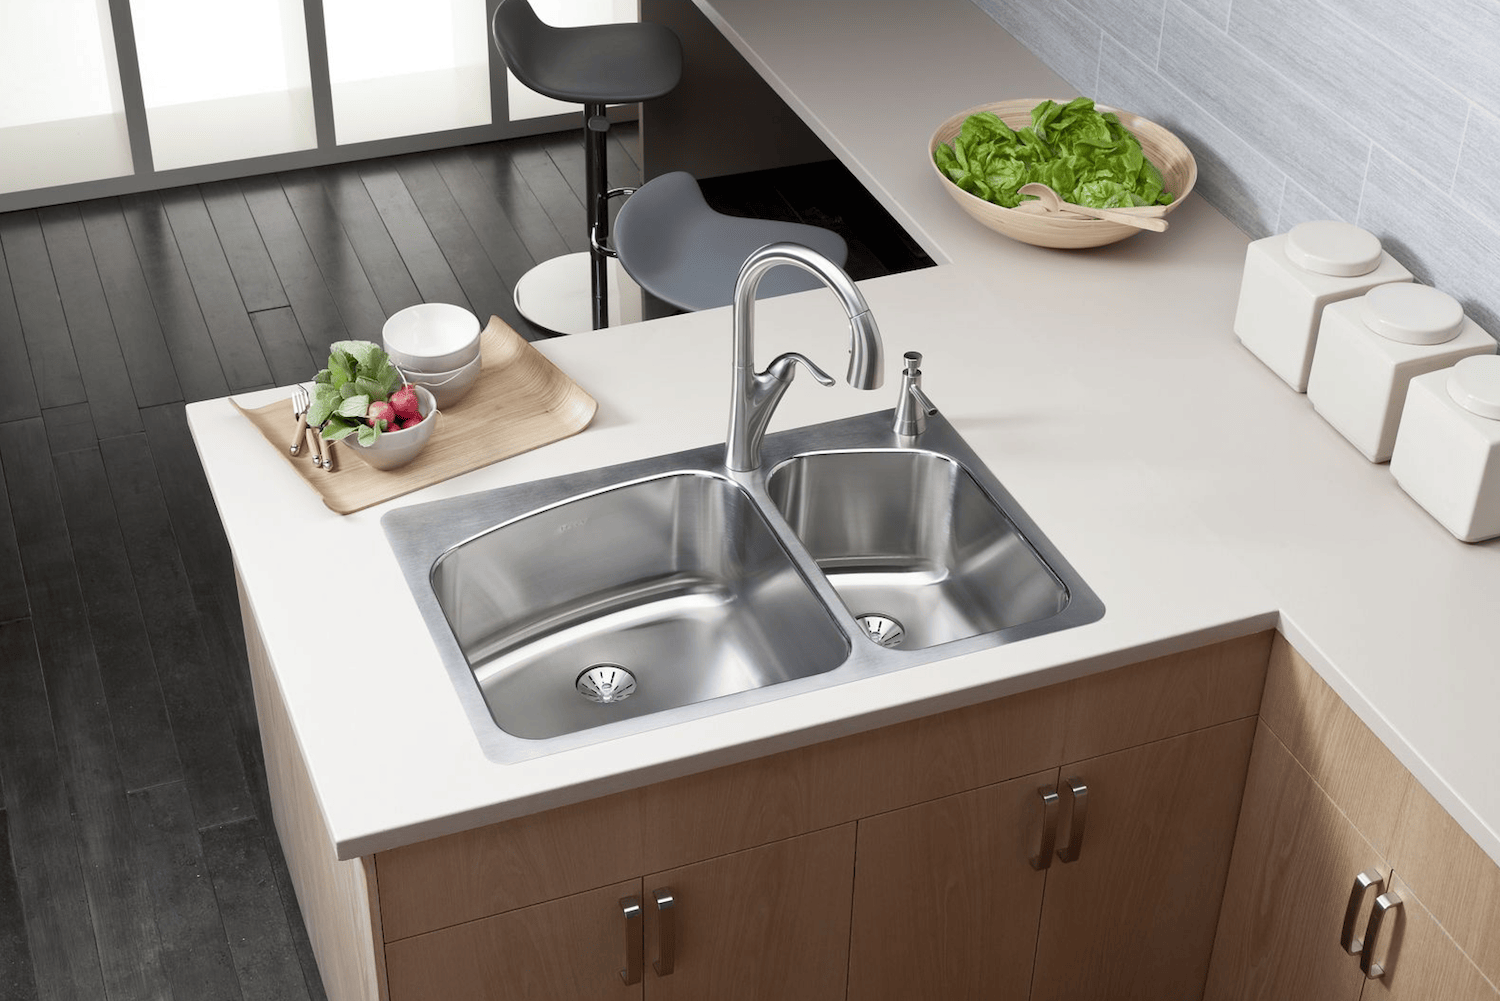 elkay kitchen sink with low divide